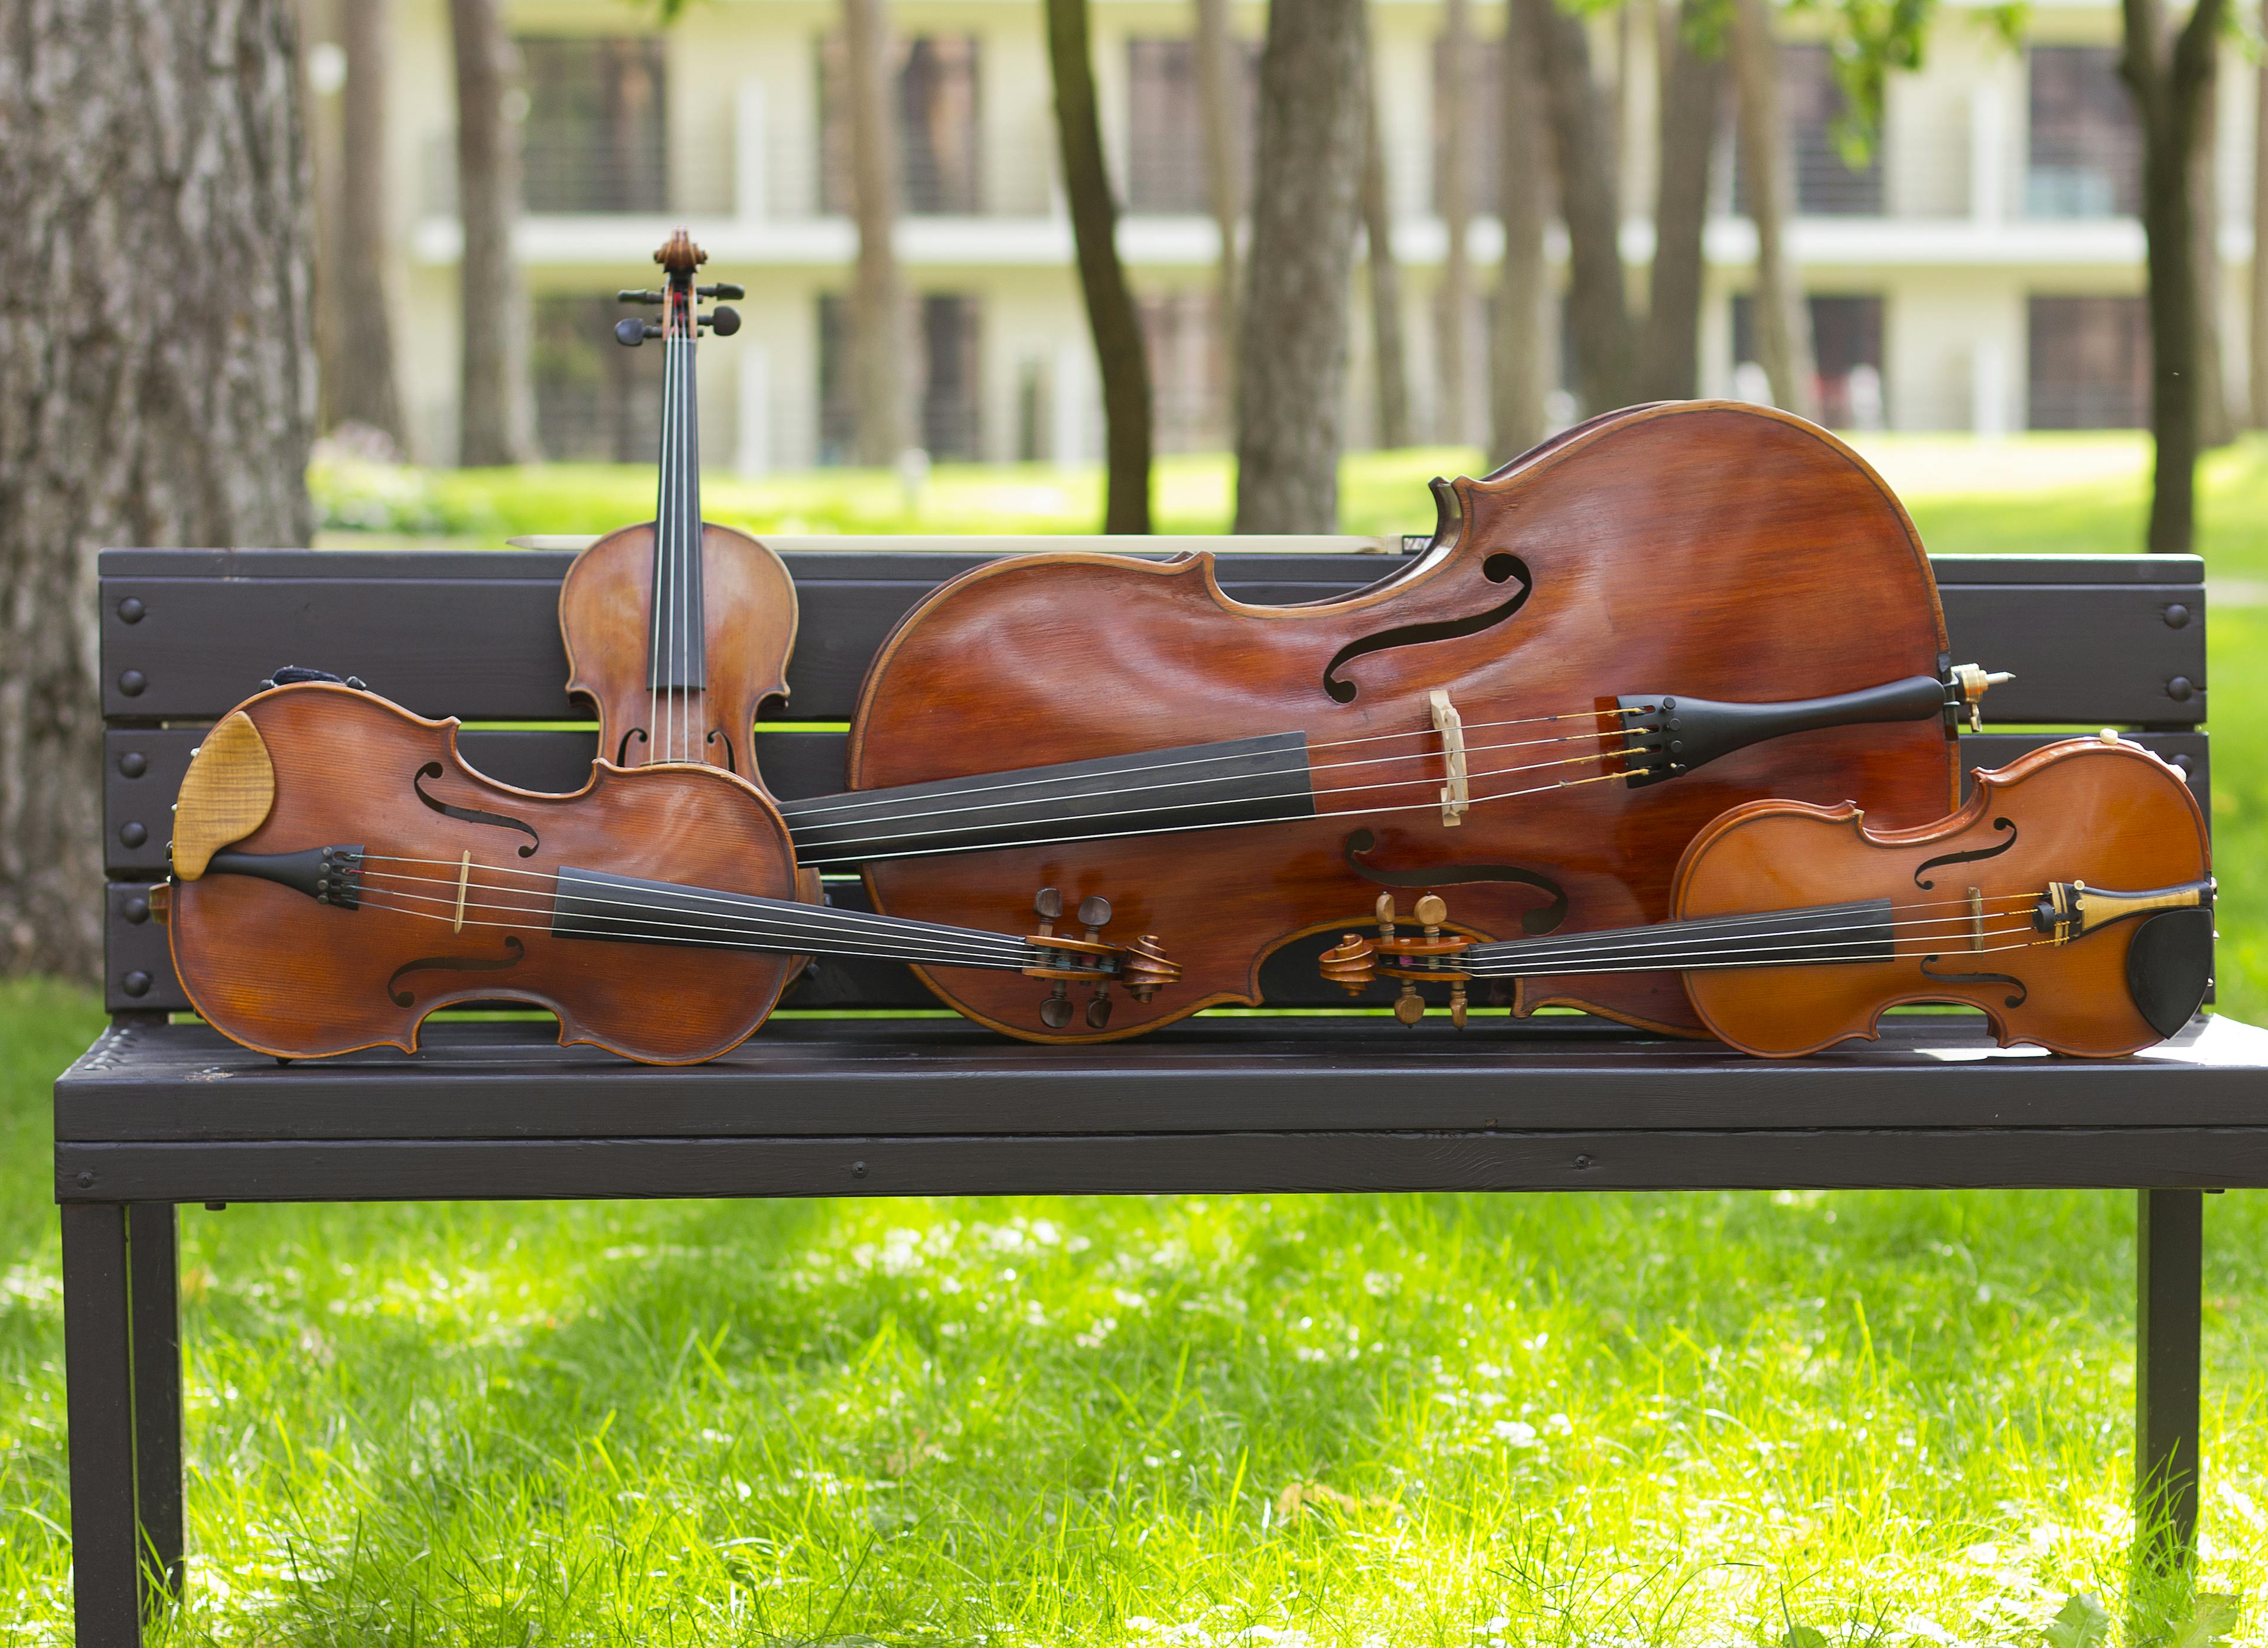 string instruments arranged on a park bench